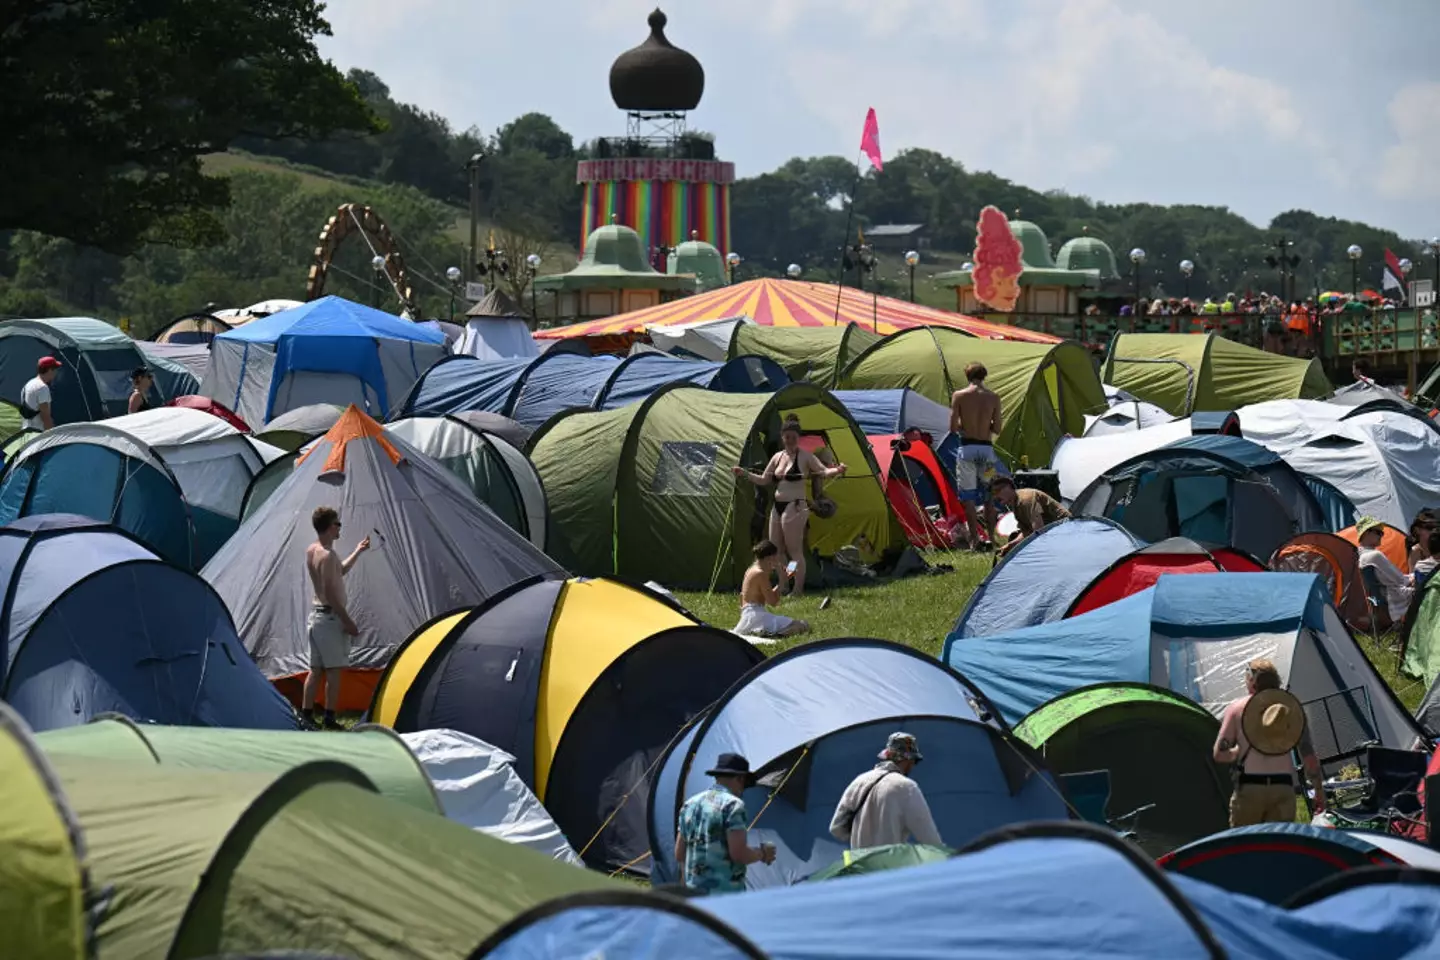 Glastonbury is back this weekend. (OLI SCARFF / Contributor / Getty Images)